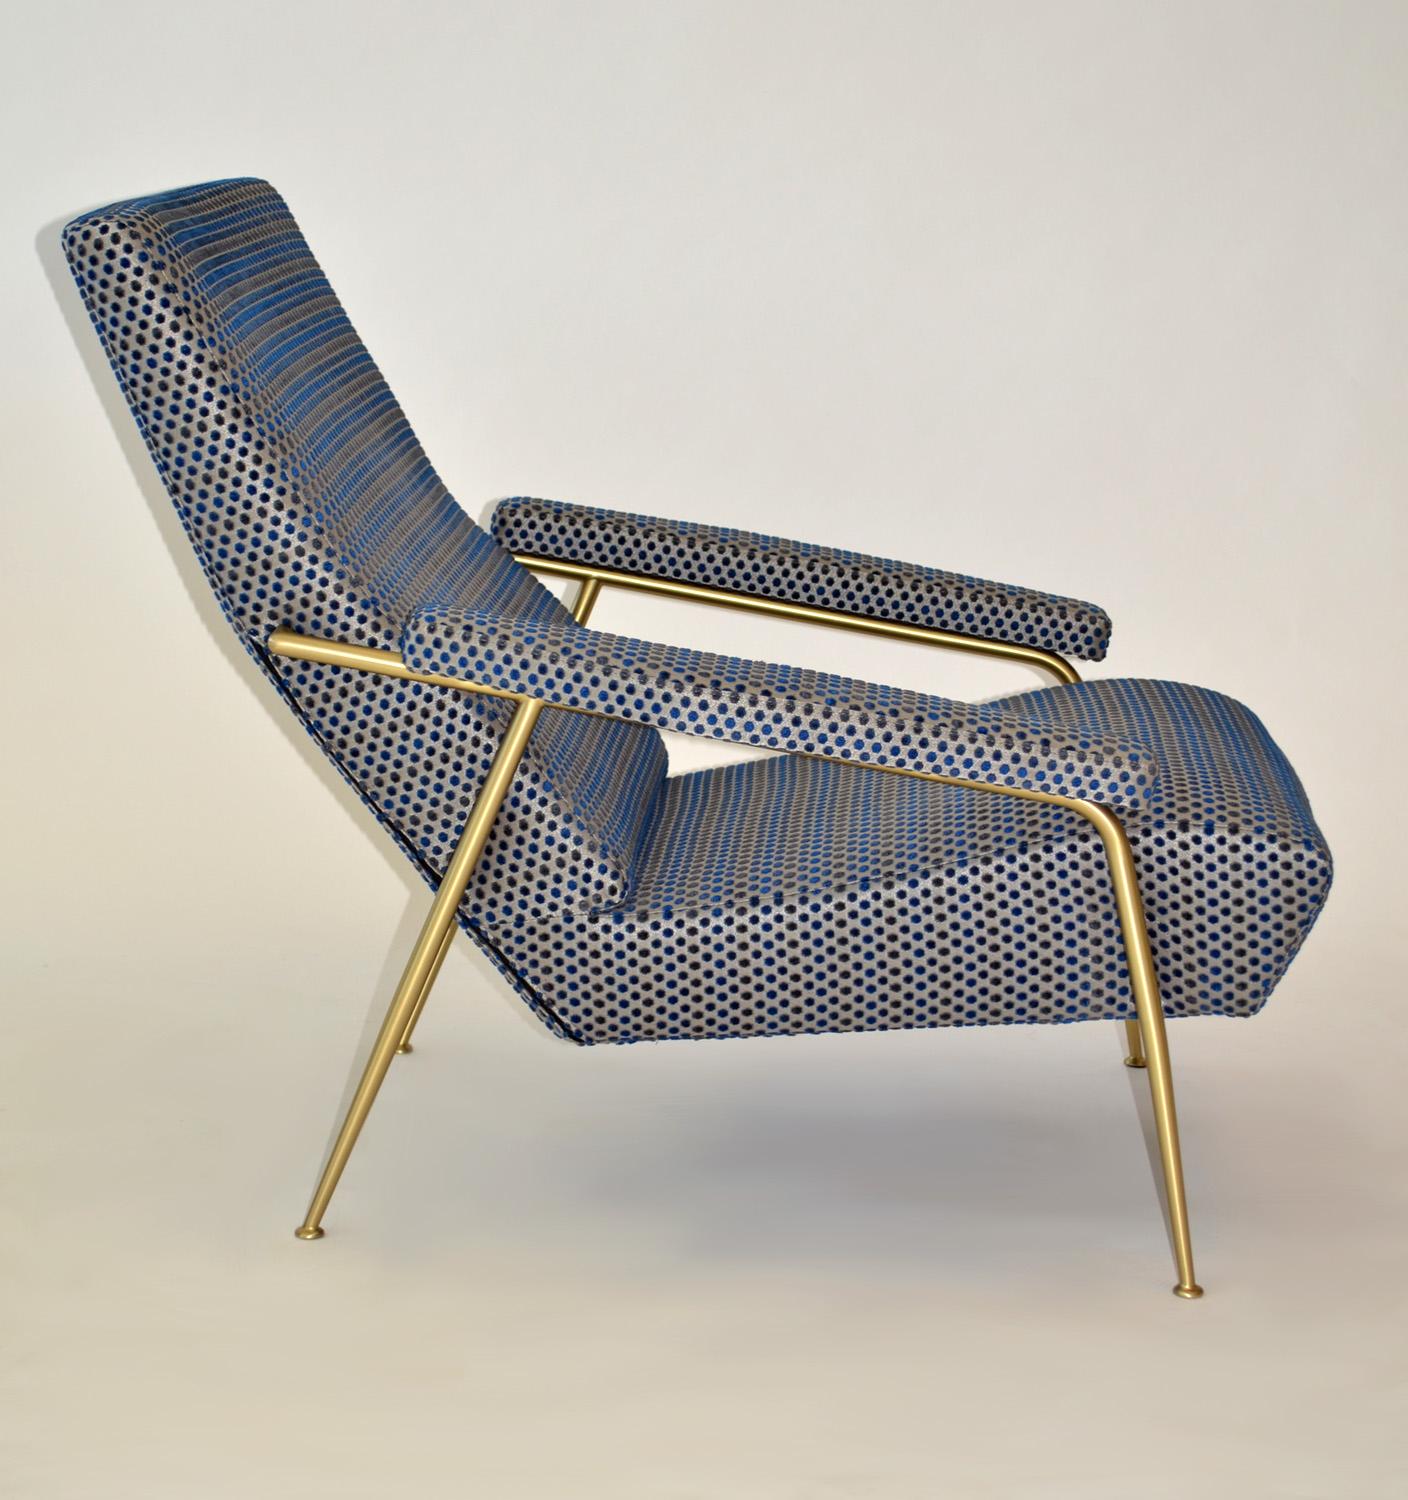 Molteni Armchair by Gio Ponti Mid-Century Modern, 'Via Dezza' D153.1
Nearly-new armchair or lounge designed by Gio Ponti, manufactured by Molteni.
Ponti first designed his 1957 Via Dezza family home in Milan, and then the furniture for it, which